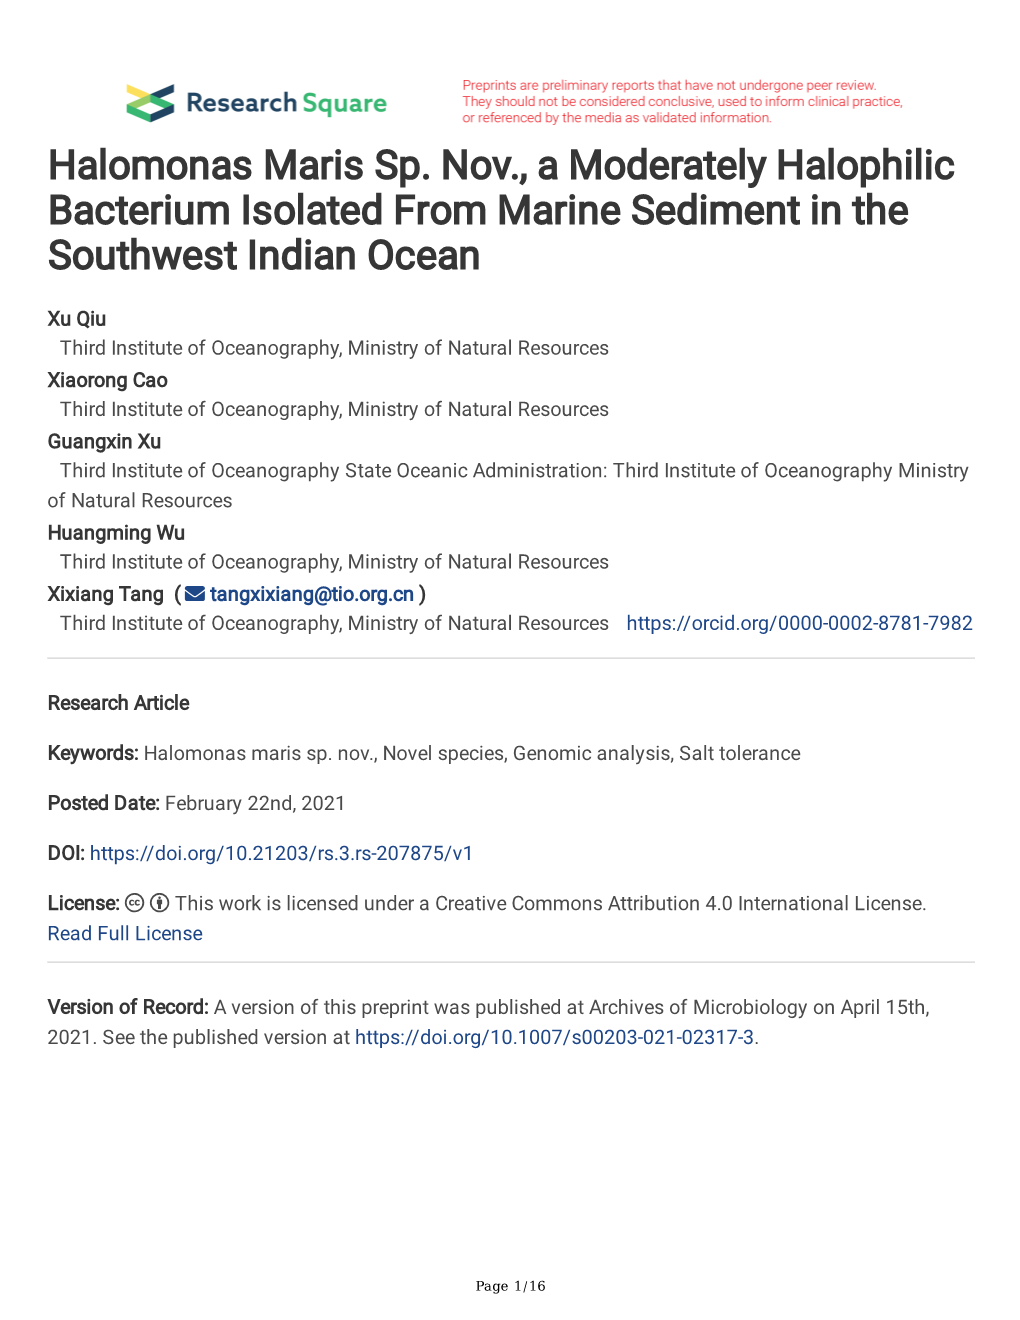 Halomonas Maris Sp. Nov., a Moderately Halophilic Bacterium Isolated from Marine Sediment in the Southwest Indian Ocean